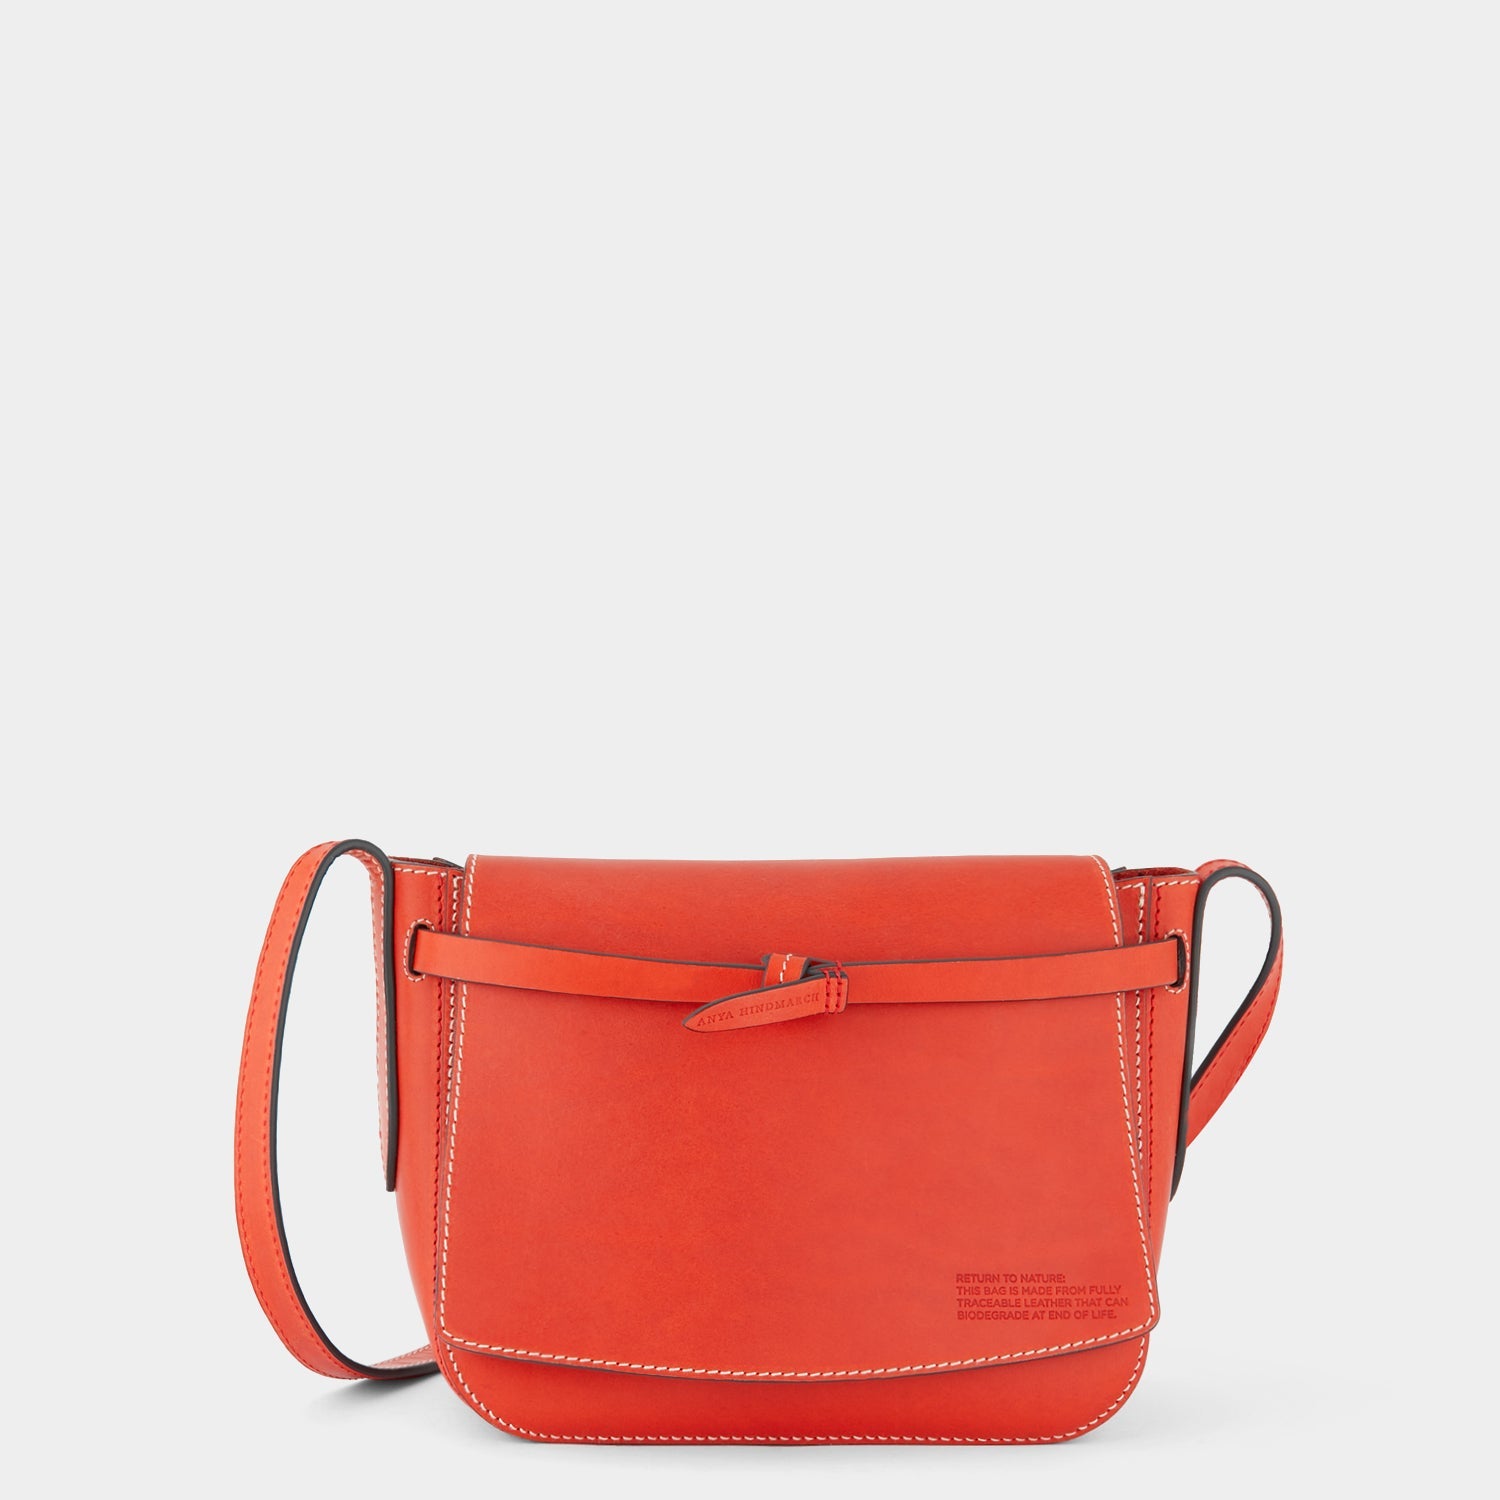 Return to Nature Cross-body -

                  
                    Compostable Leather in Flame Red -
                  

                  Anya Hindmarch EU
